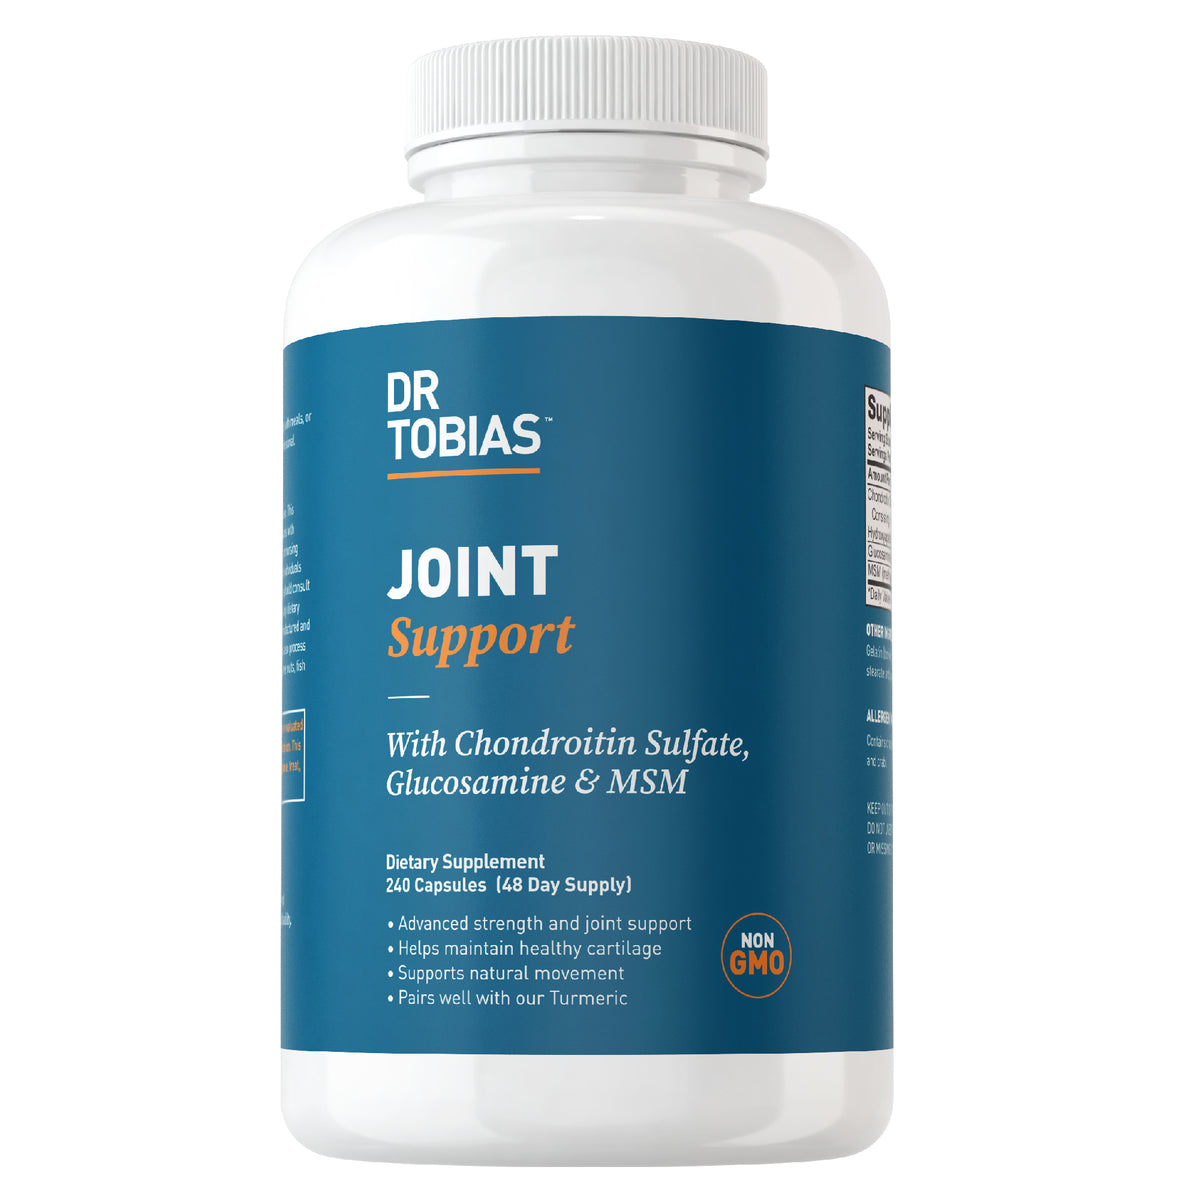 Dr Tobias Joint Support Supplement with Chondroitin Sulfate Glucosamin & MSM